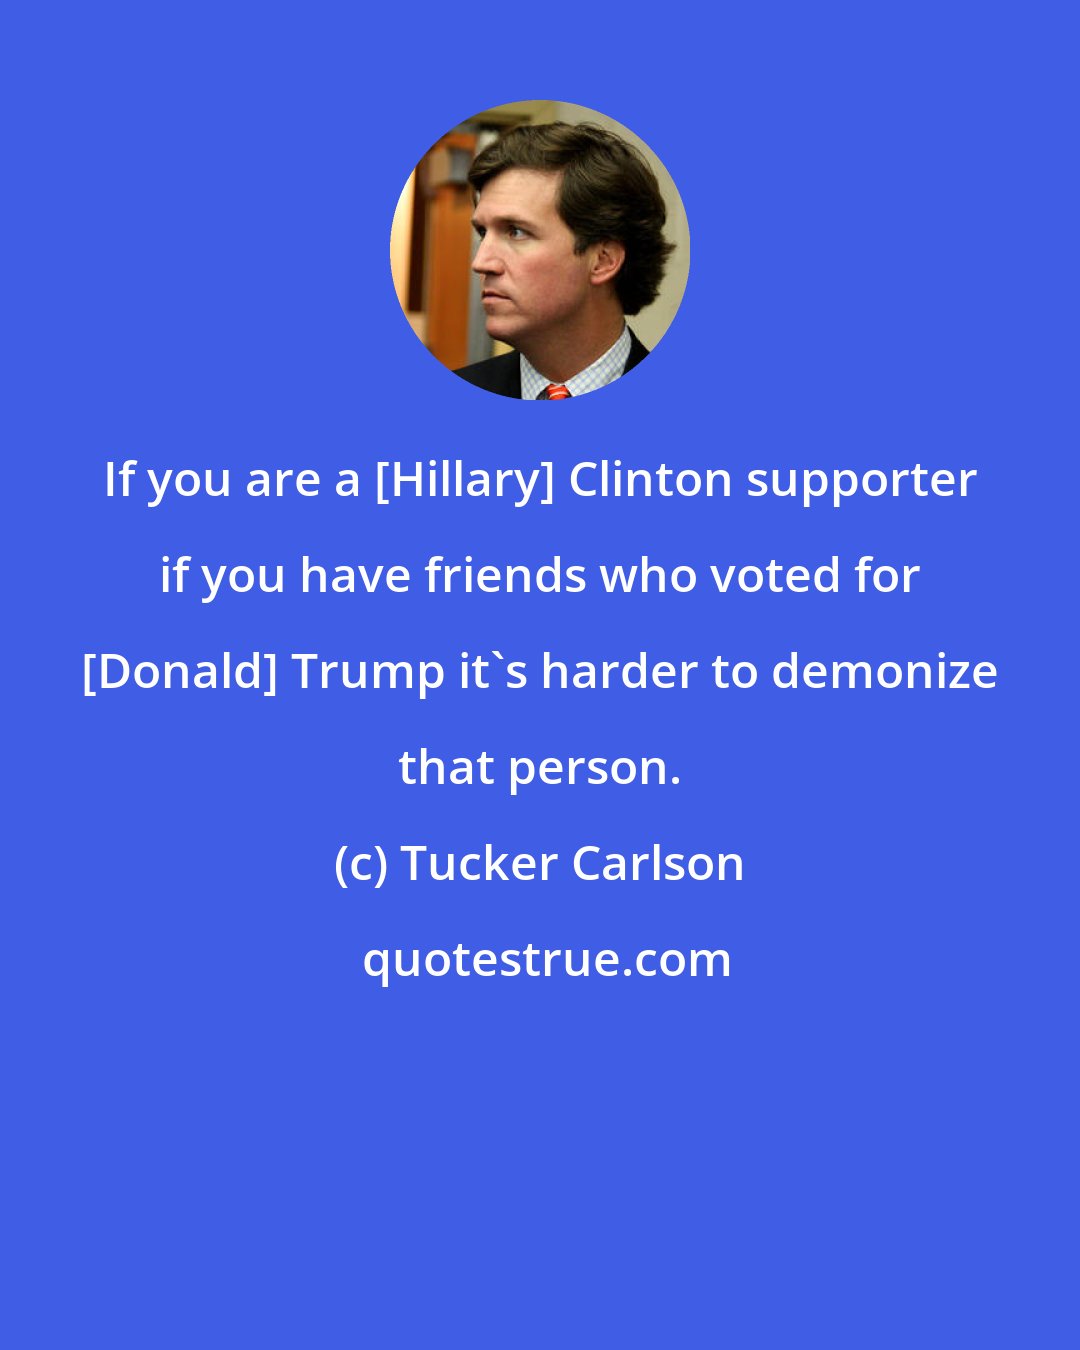 Tucker Carlson: If you are a [Hillary] Clinton supporter if you have friends who voted for [Donald] Trump it's harder to demonize that person.